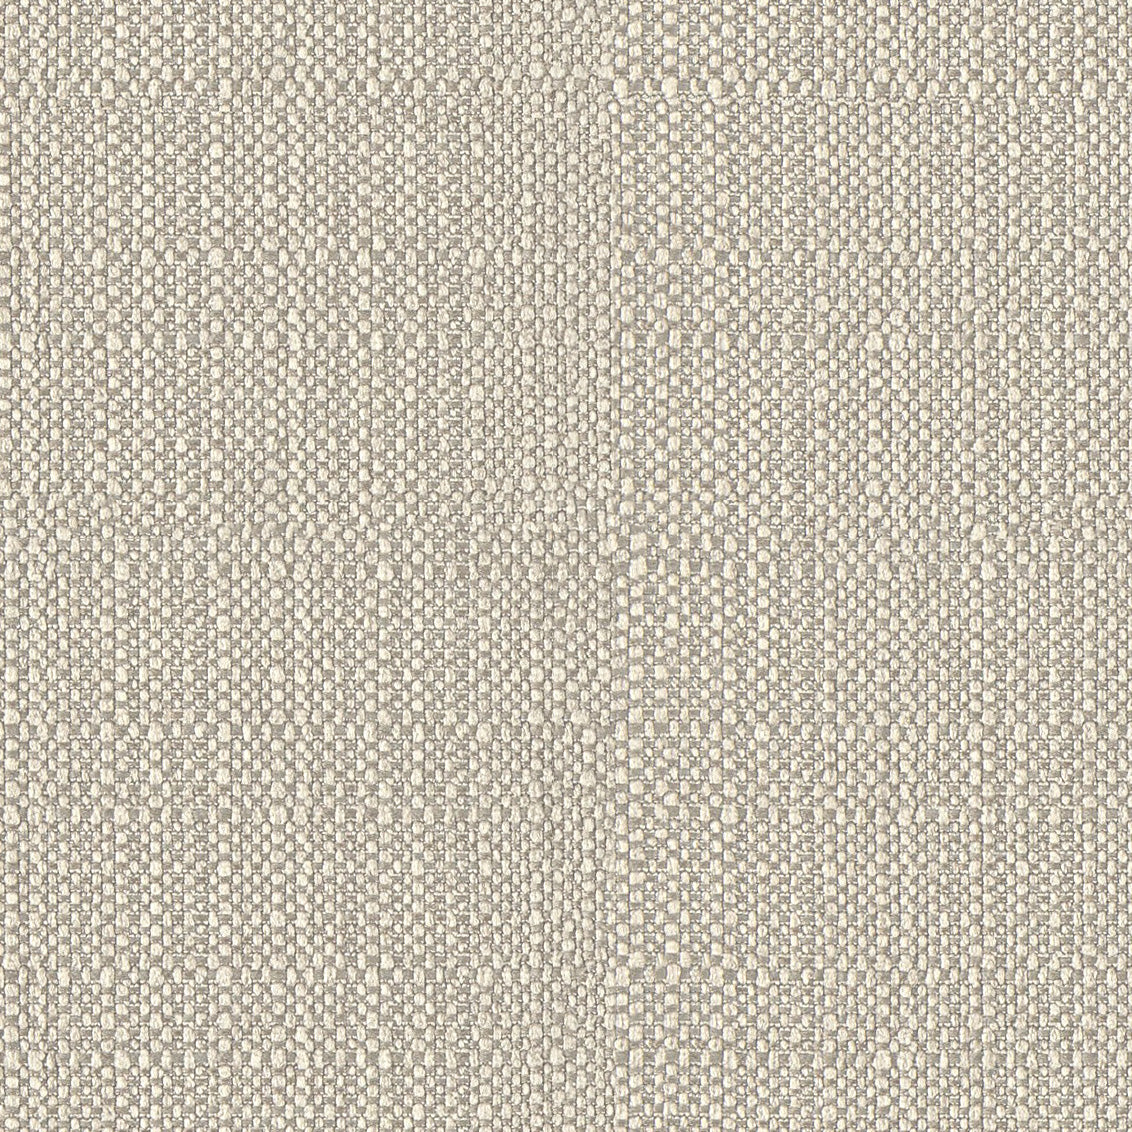 Oyster Box Weave Linen - Swatch